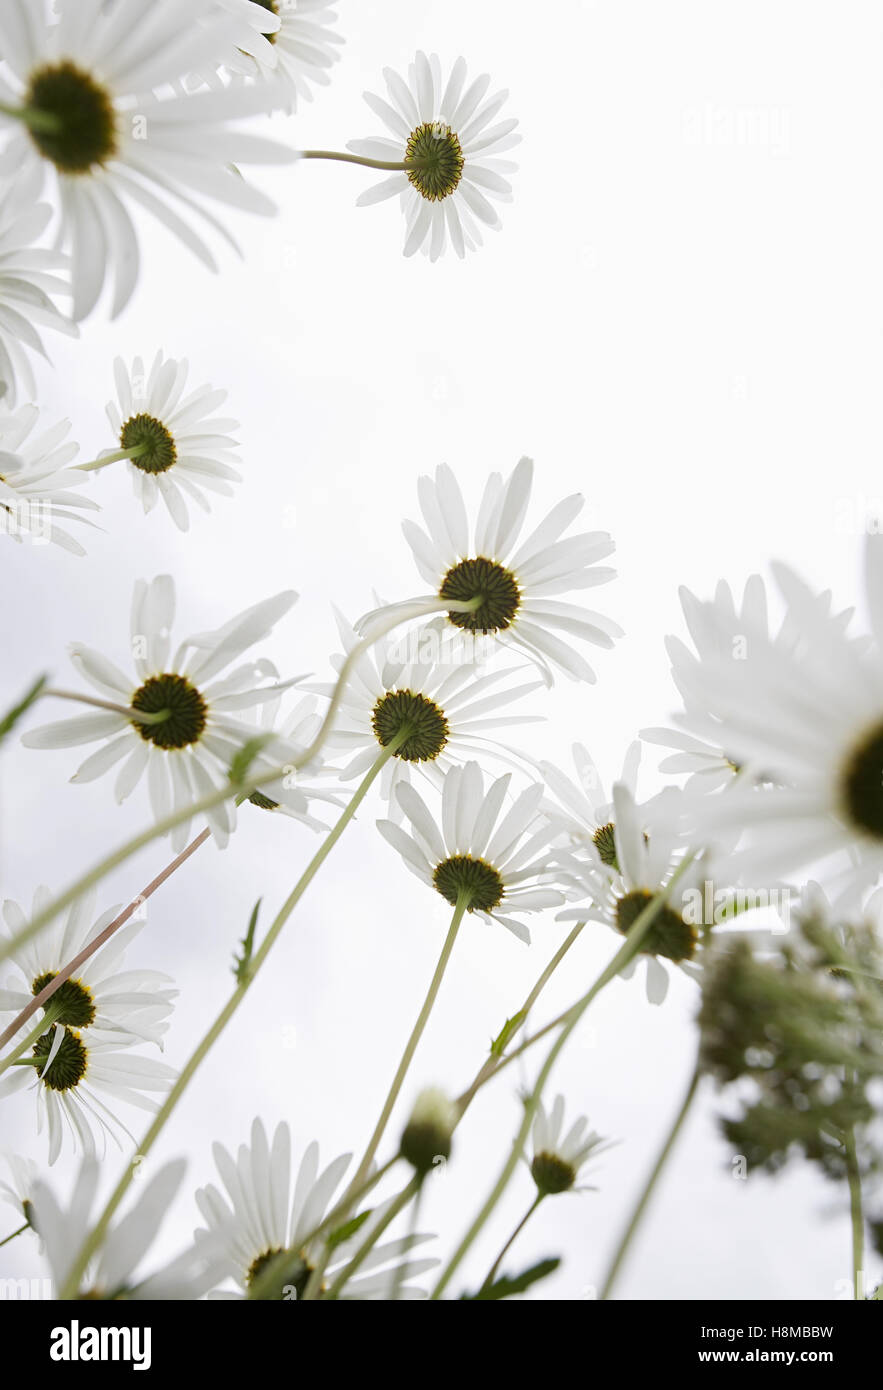 Field of Daisy flowers, low angle view, close up Stock Photo